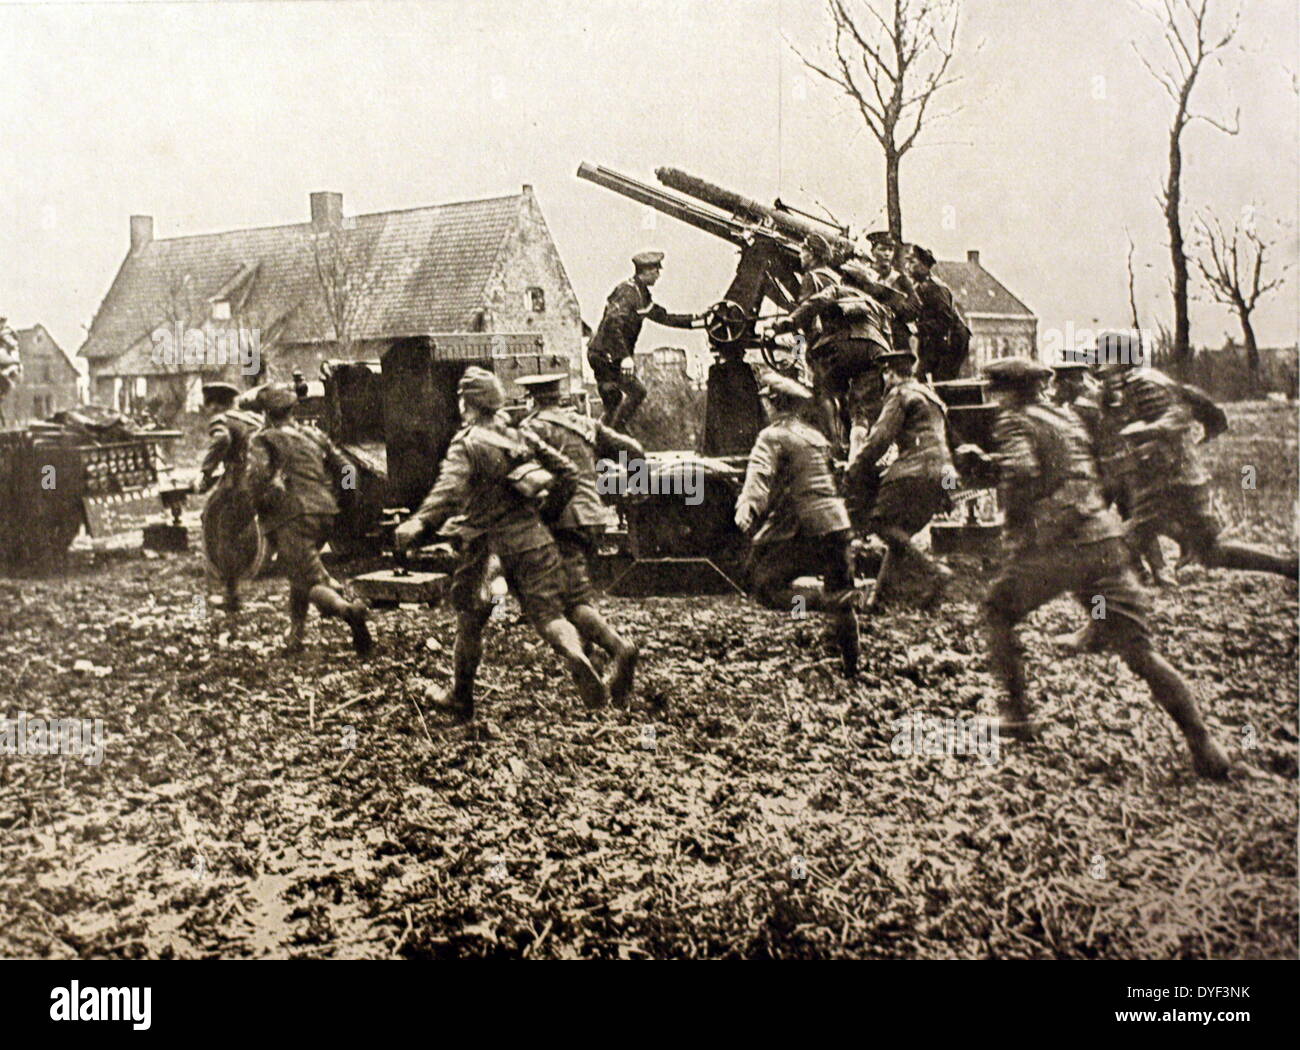 A photograph from the First World War, showing soldiers running into an area while two gunners man an anti aircraft gun just next to them. Circa 1914-1918. Stock Photo